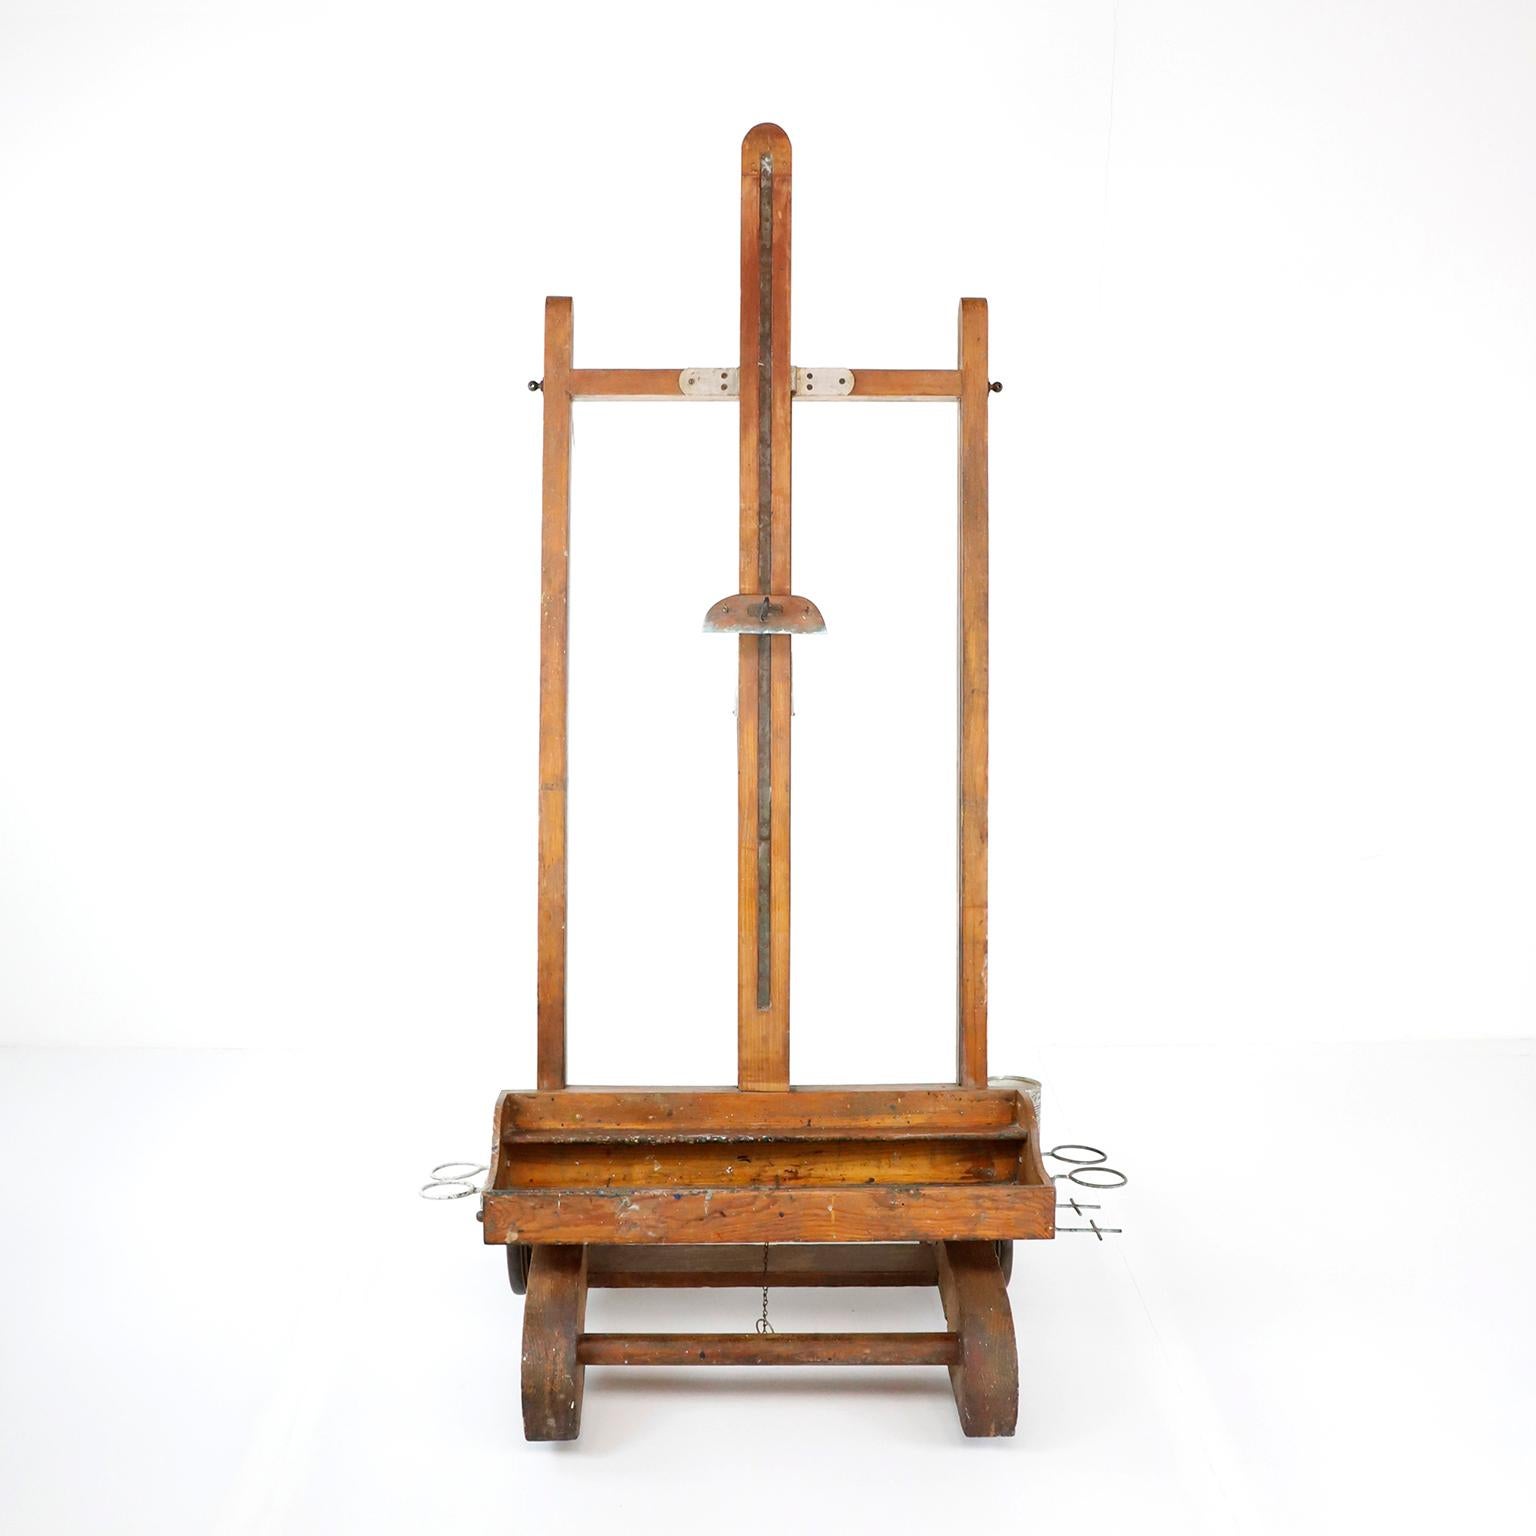 Rare Mexican wooden adjustable artist easel, circa 1940, made in pine wood has a nice old patina, with remnants of artistic creations of past, include some notes from the previous owner artist, height is adjustable.